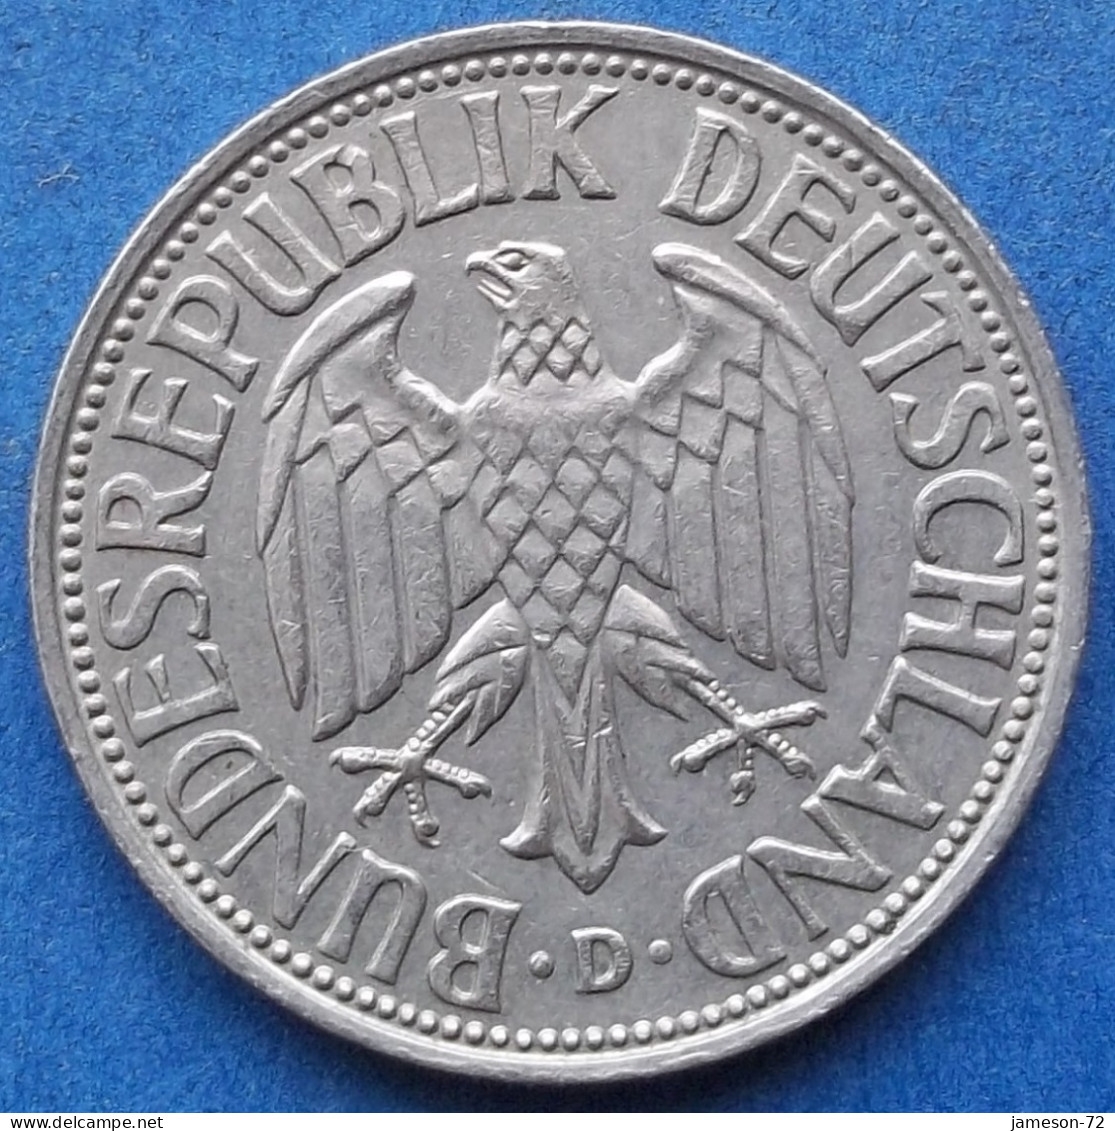 GERMANY - 1 Mark 1965 D KM# 110 Federal Republic Mark Coinage (1946-2002) - Edelweiss Coins - 1 Mark